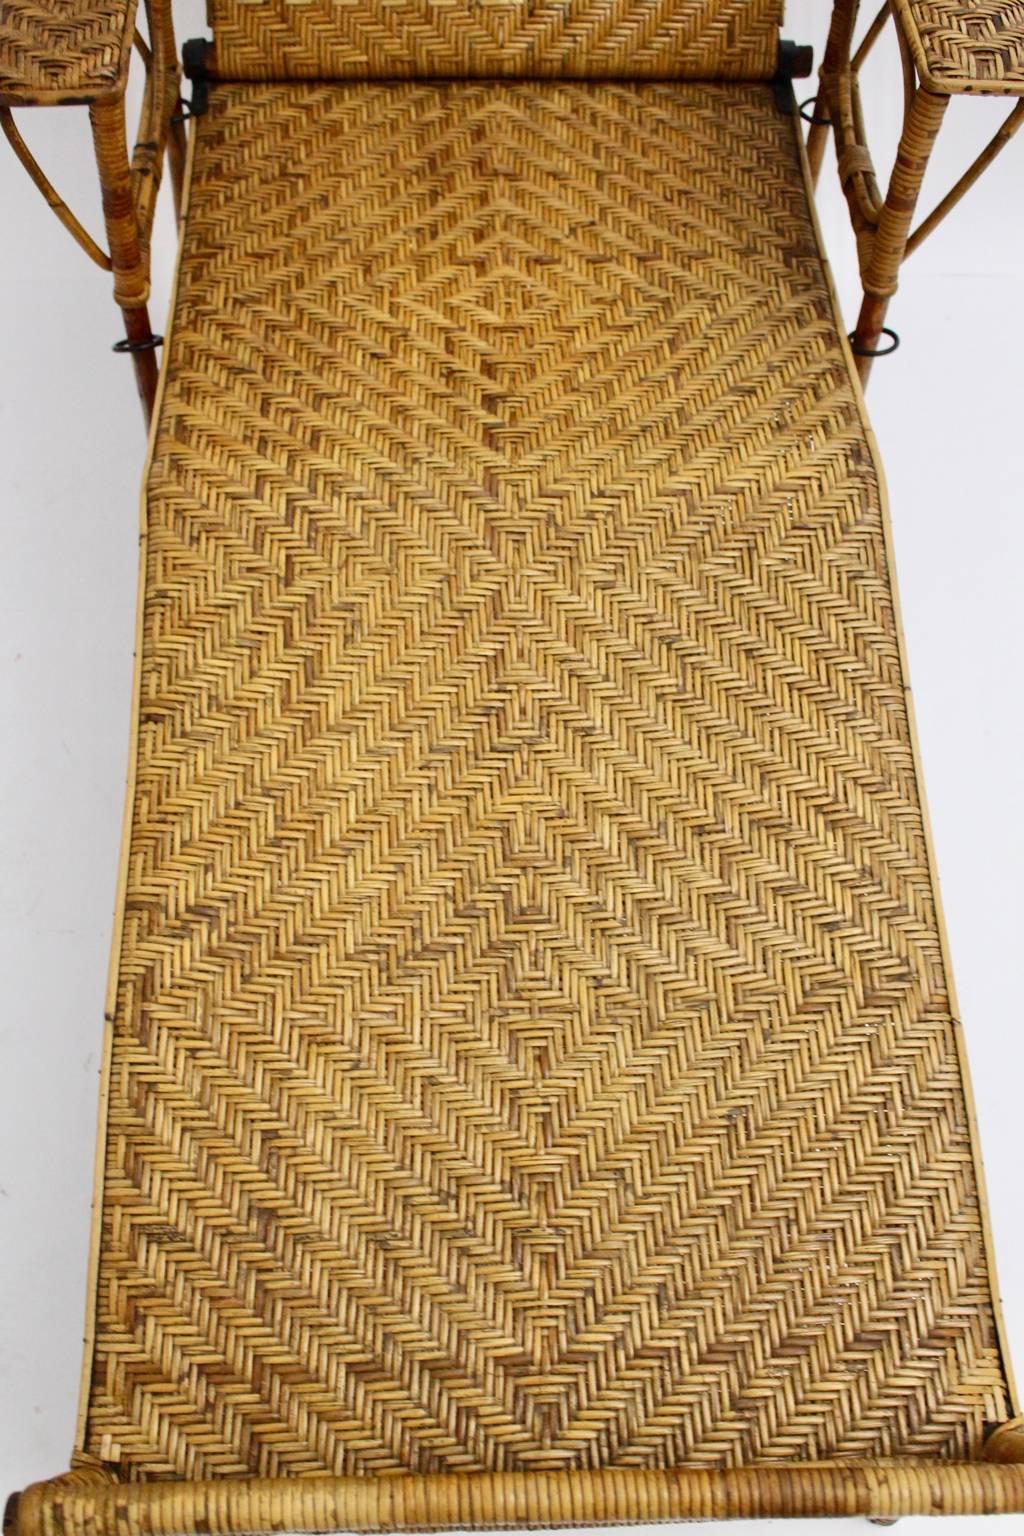 Rattan Art Deco Vintage Chaise Longue by Perret & Vibert Attributed France 1920s For Sale 6